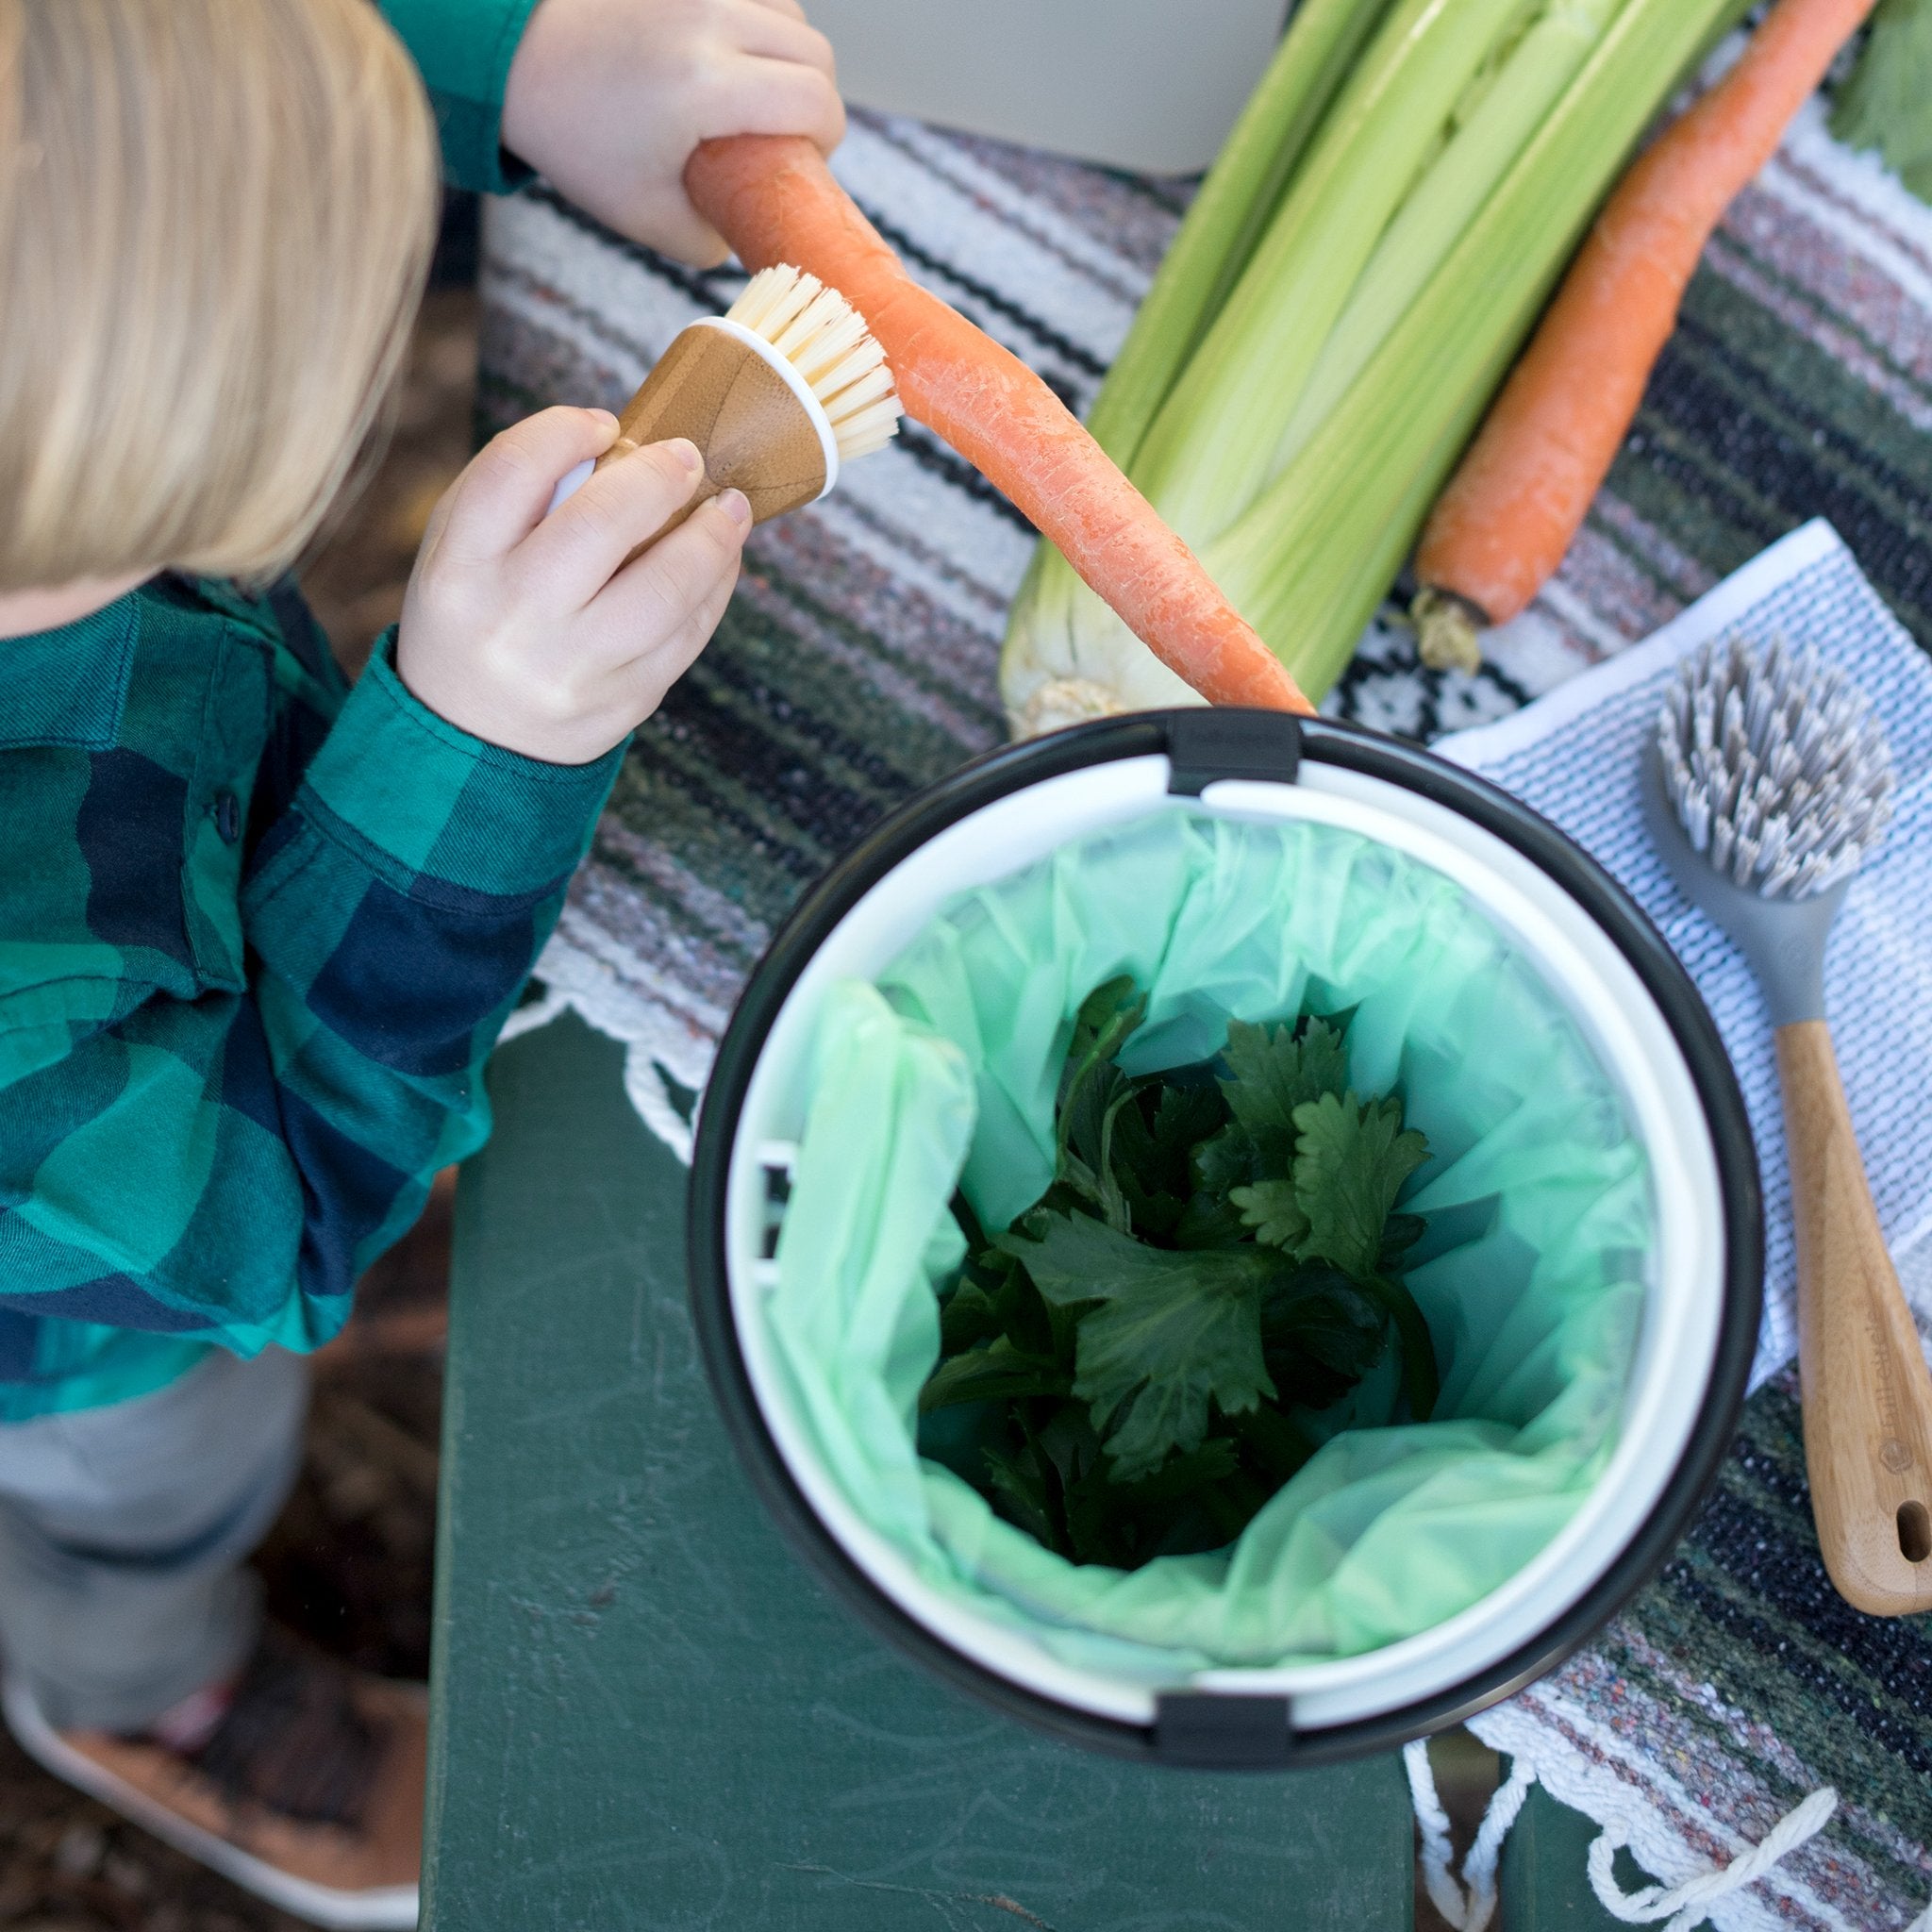 Cute Countertop Compost Bins For Sustainable Living